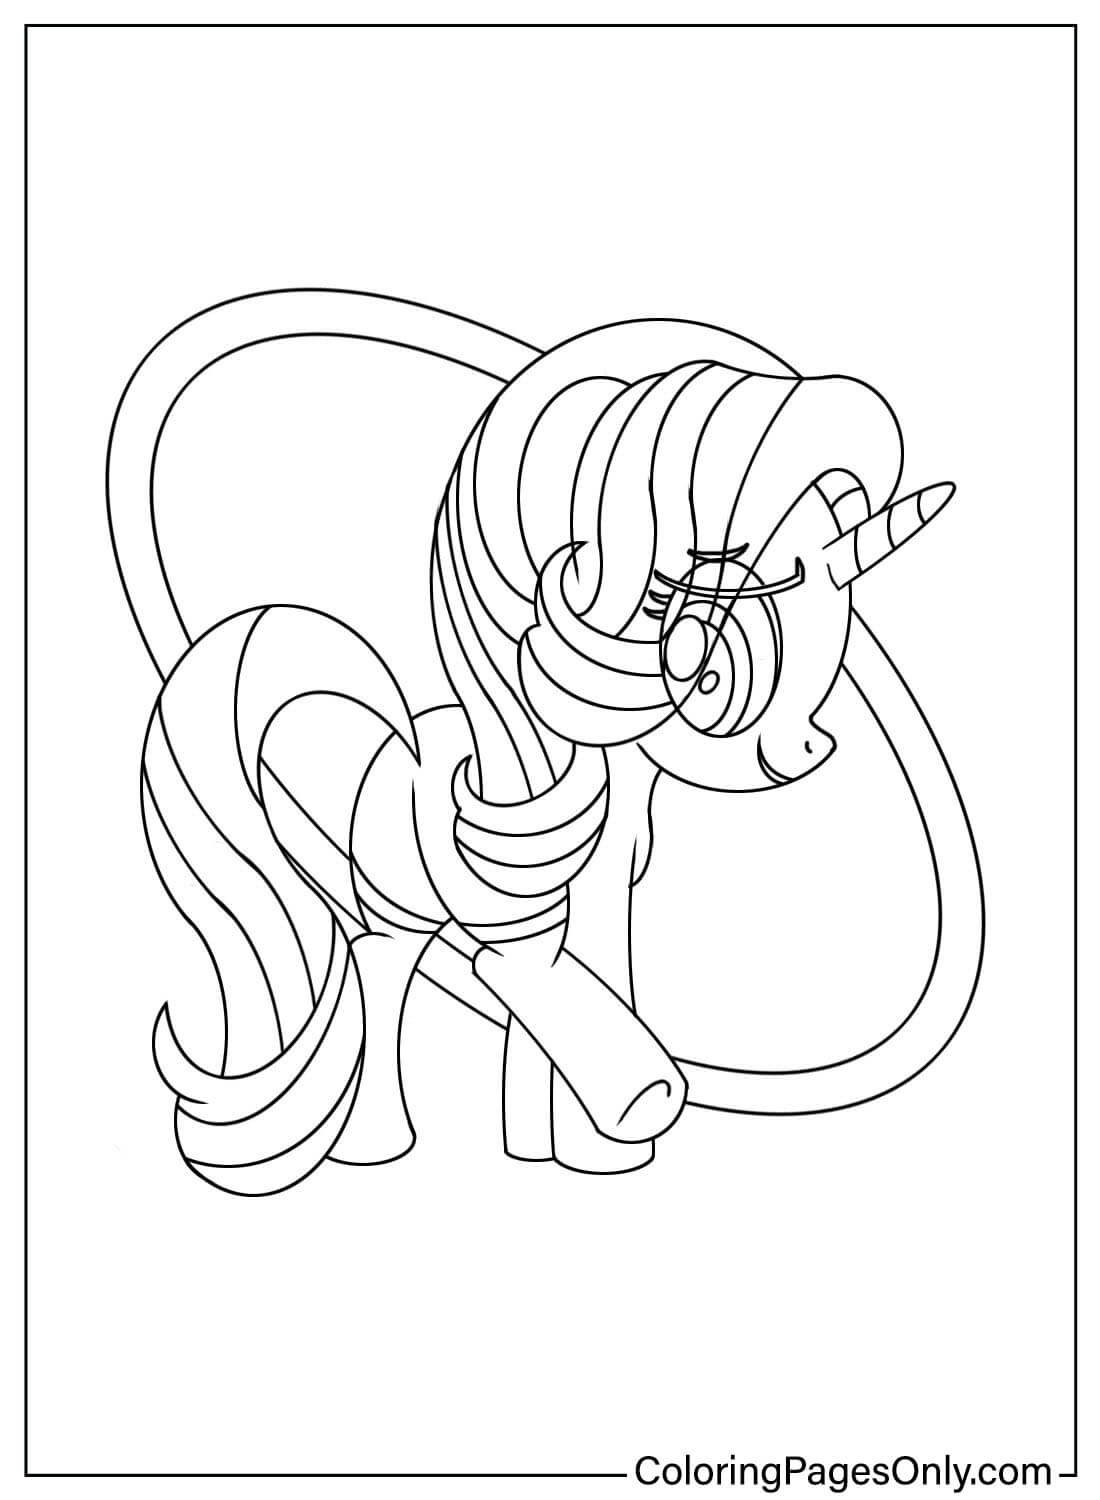 Free Starlight Glimmer Coloring Page from Starlight Glimmer